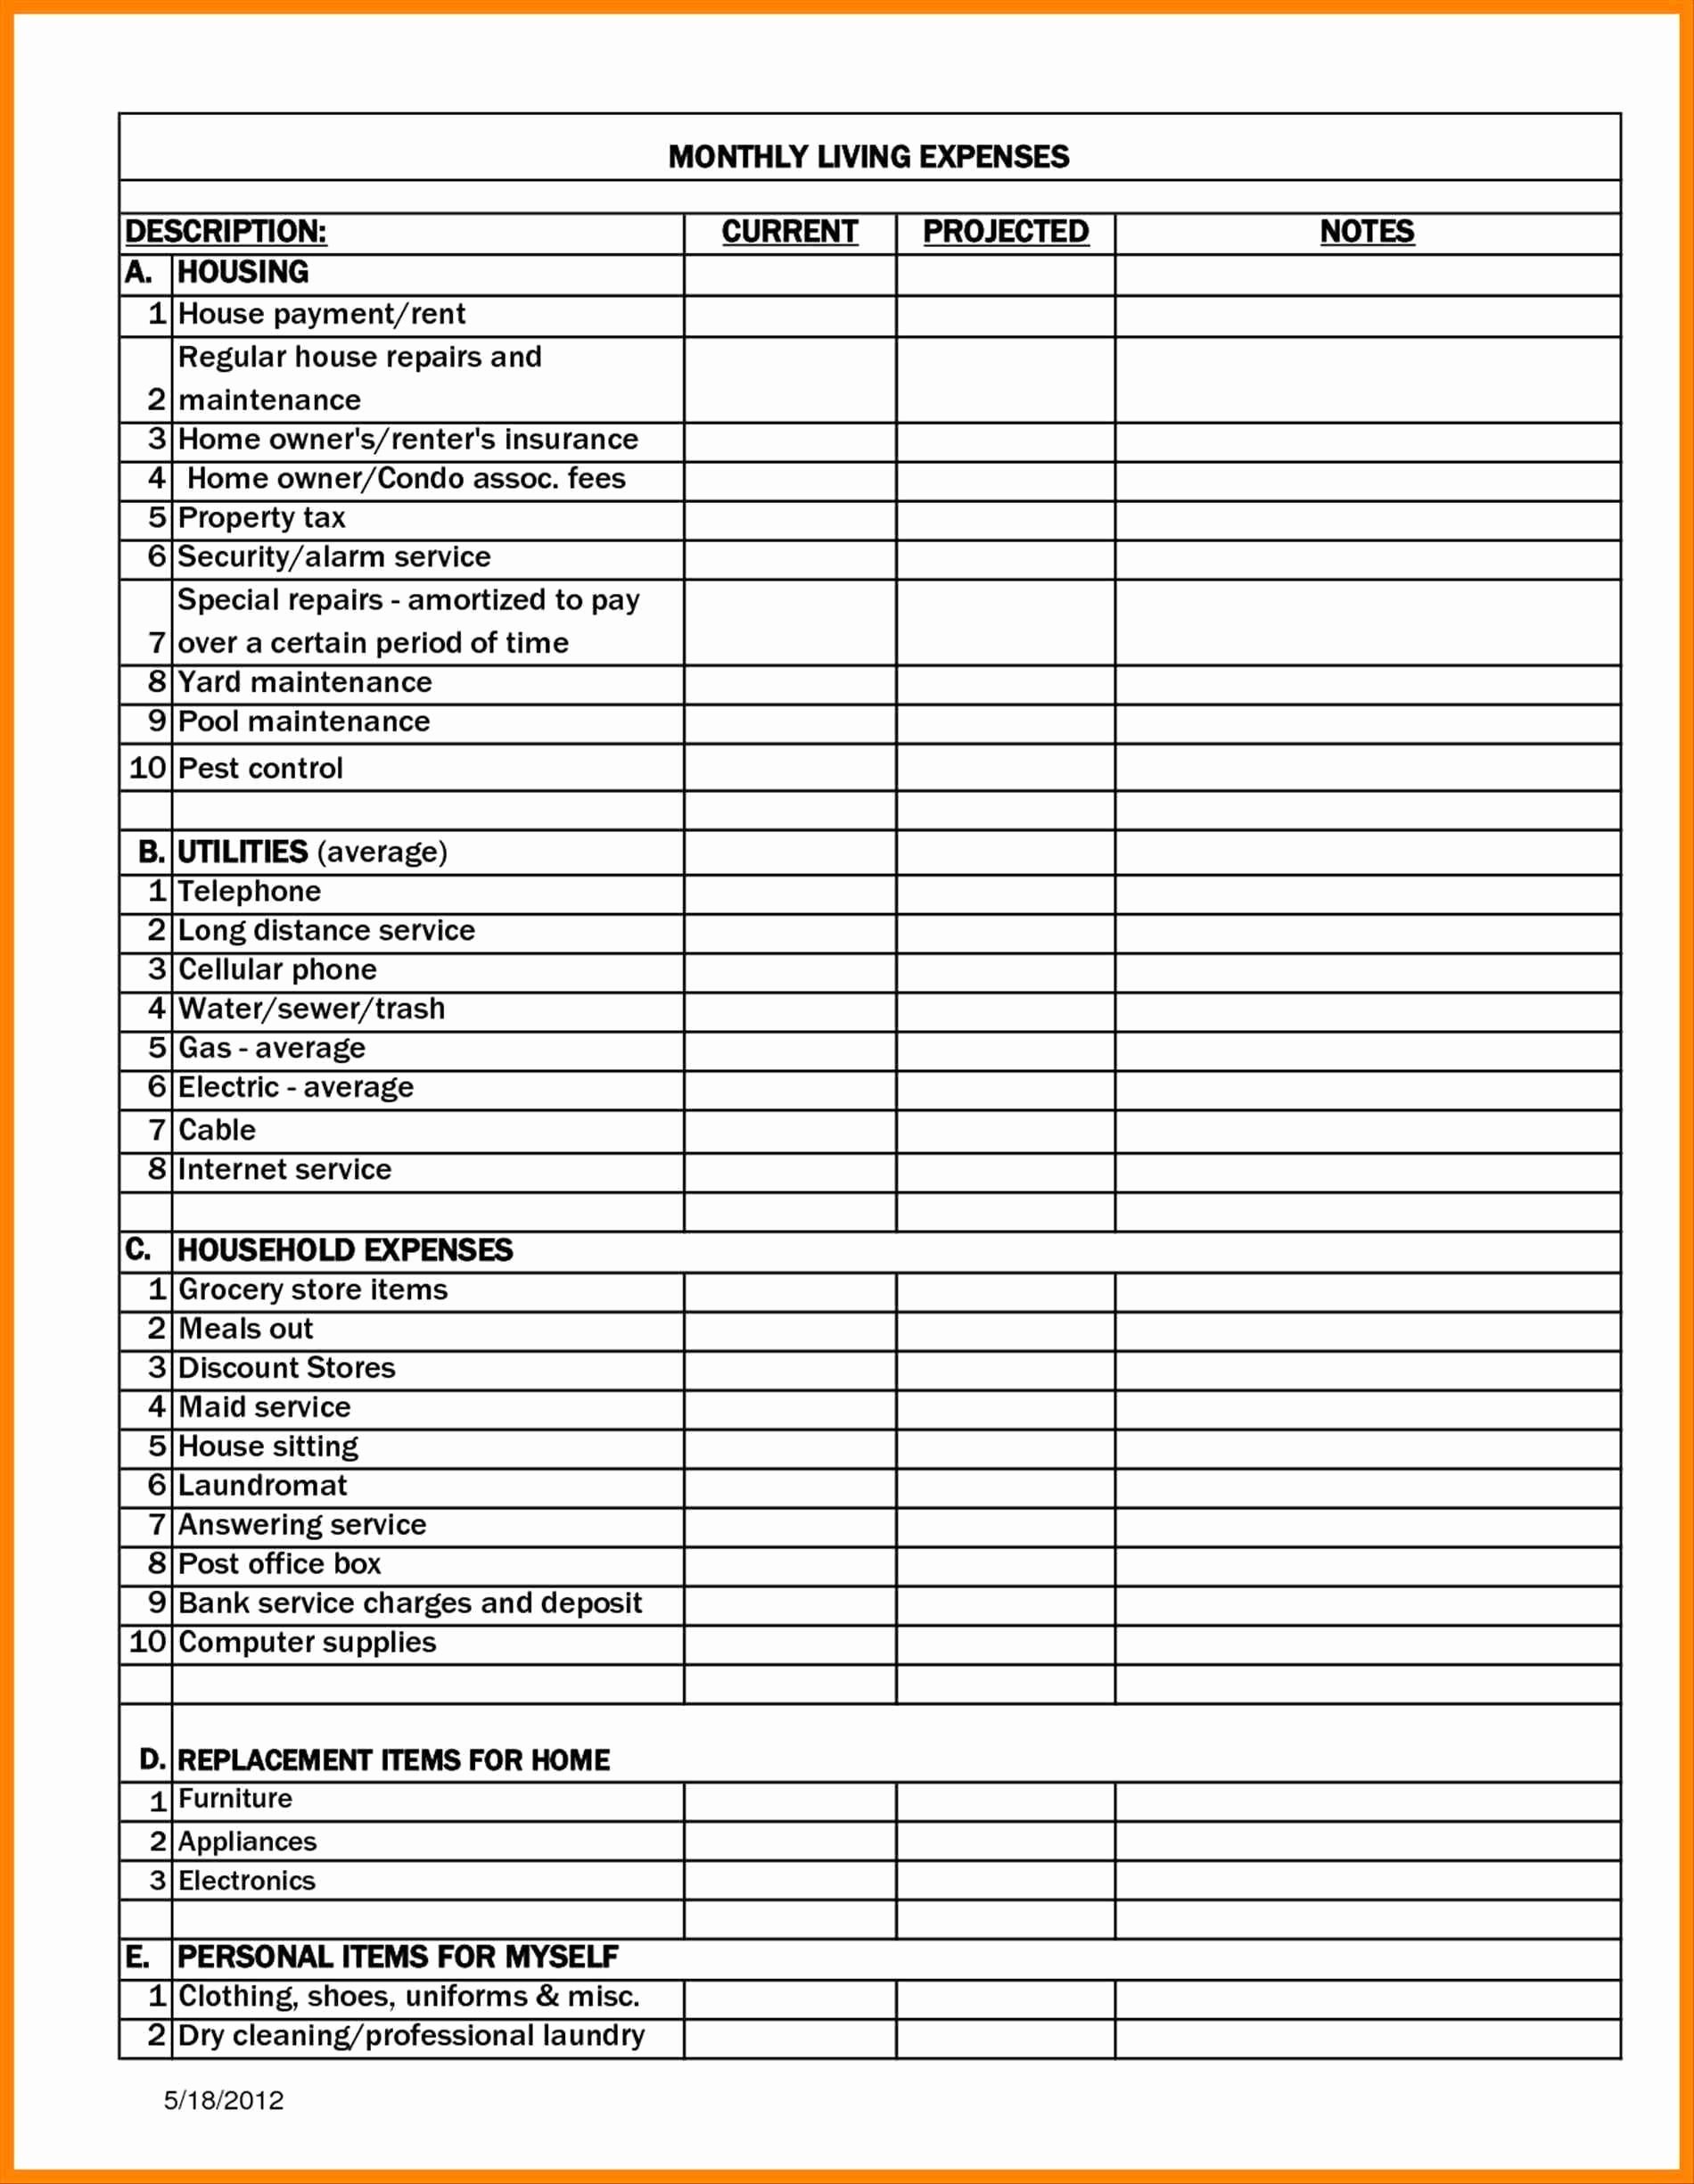 Monthly Expense Report Template Awesome Personal Monthly Expense Report Template